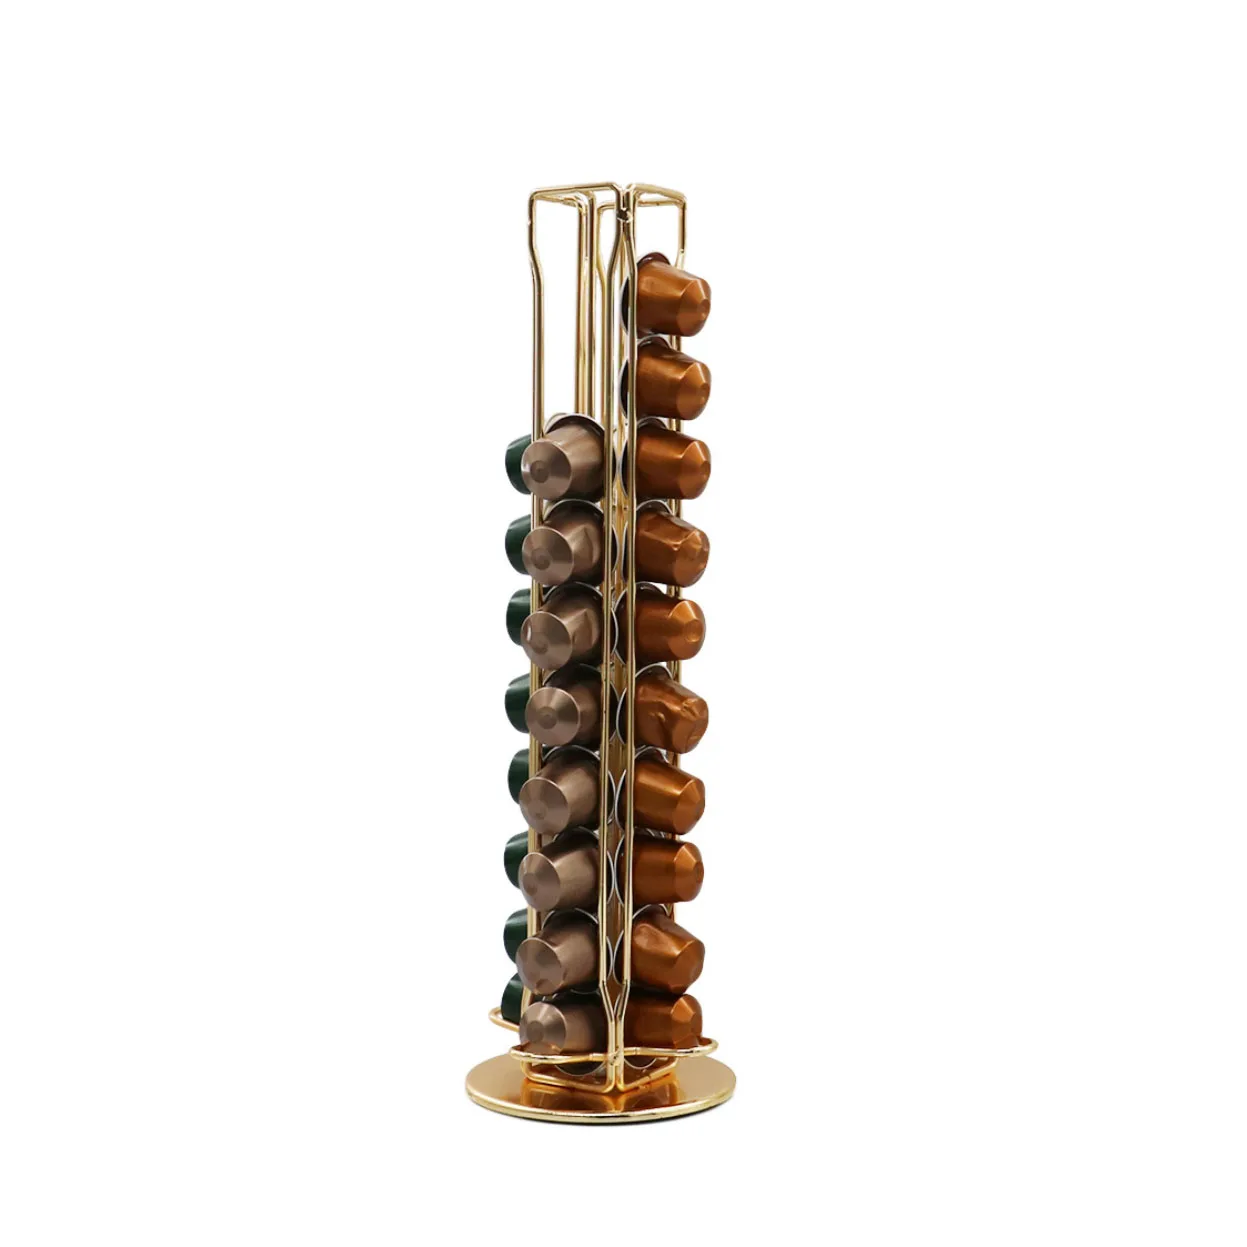 

Coffee holder Stainless Steel 360 rotating 40 capsule coffee cup pod holder tower stand rackfor nespresso